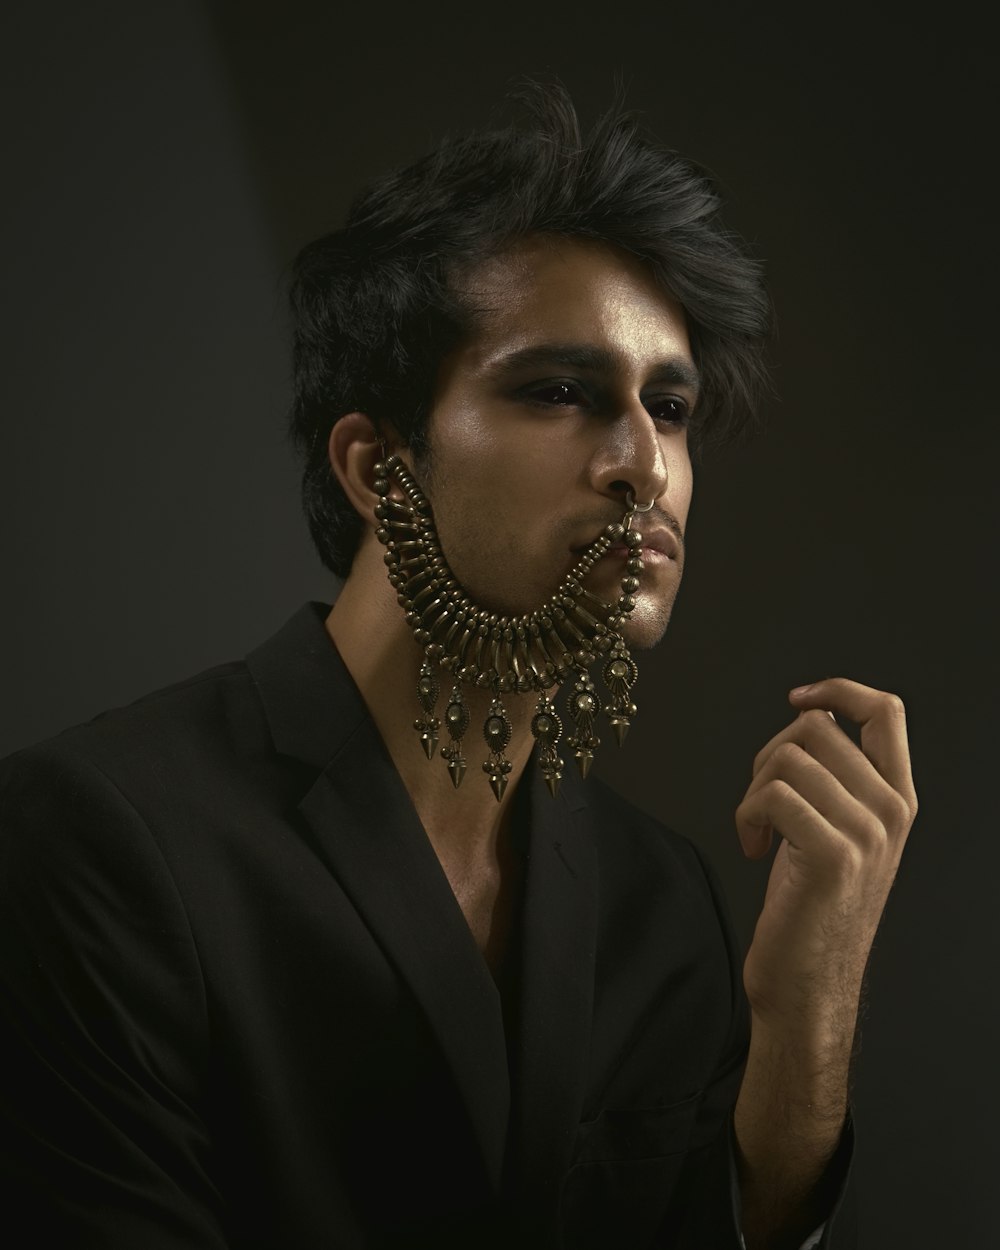  a man wearing a black suit and a gold necklace